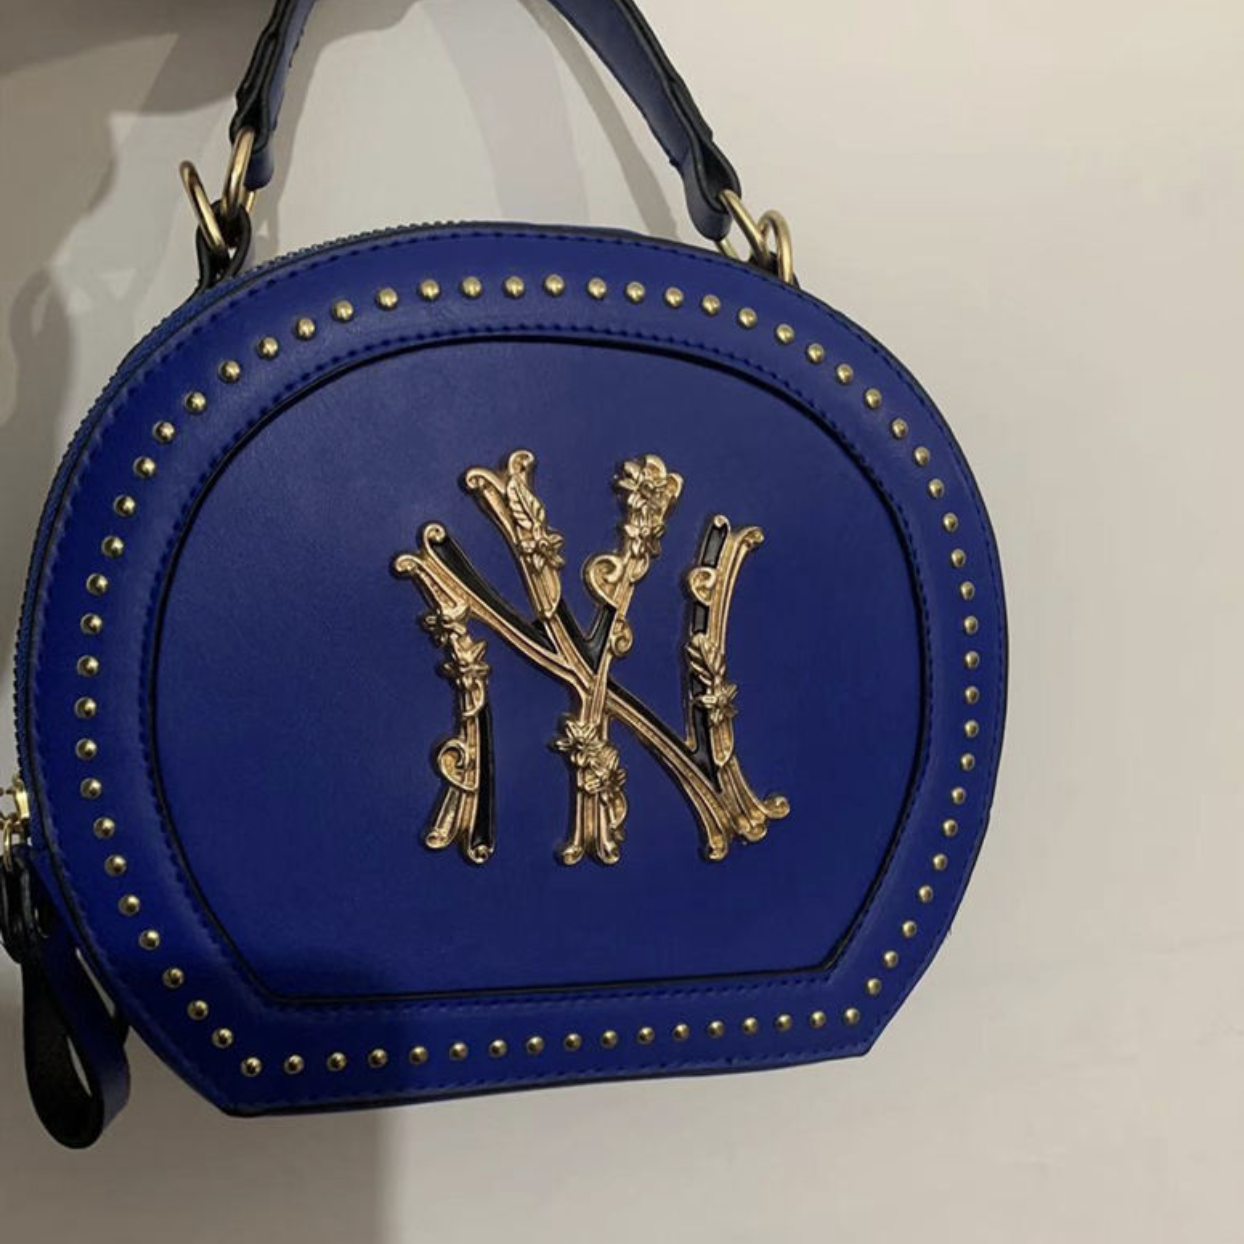 NY State of Mind Bag